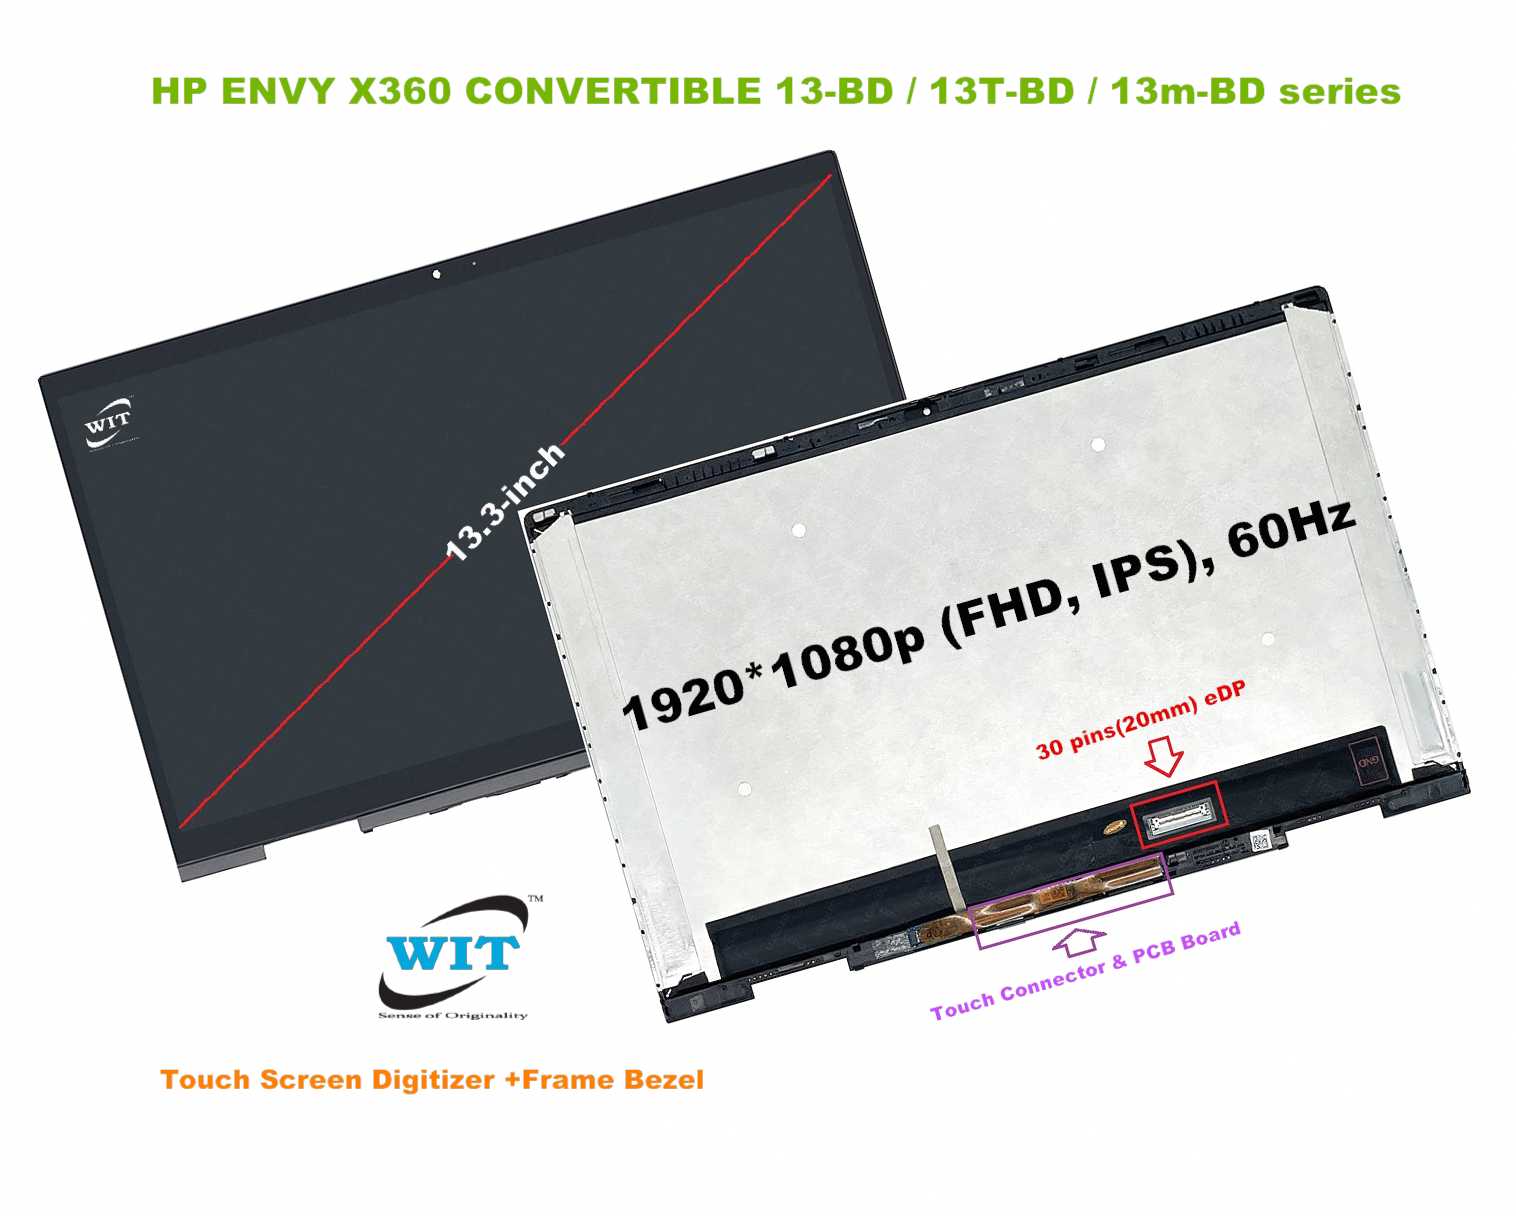 13.3-inch Touch Screen Digitizer +Frame Bezel with LED for HP Envy x360  13-bd series, HP Envy x360 13-bd0063dx 13m-bd0023dx series P/N: M15282-001,  M15283-001, Resolution: 1920*1080p (FHD, IPS), Frequency: 60Hz, Video Tip